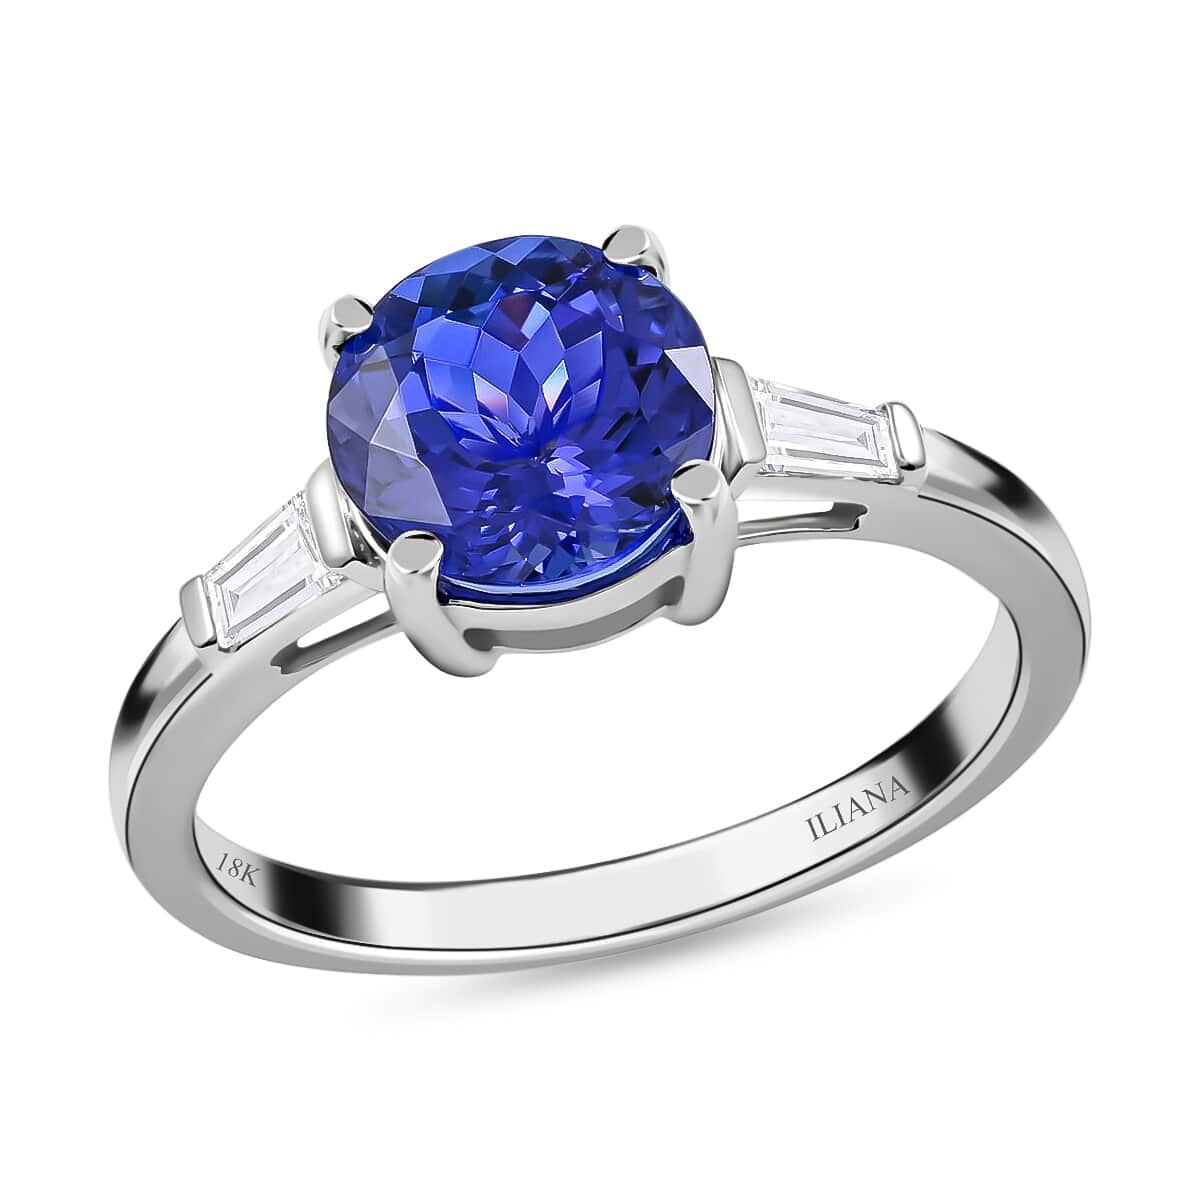 Certified and Appraised Iliana 18K White Gold AAA Tanzanite, Diamond Ring,Wedding Ring For Her,Promise Rings 3.41 Grams 2.30 ctw (Size 6.0) image number 0